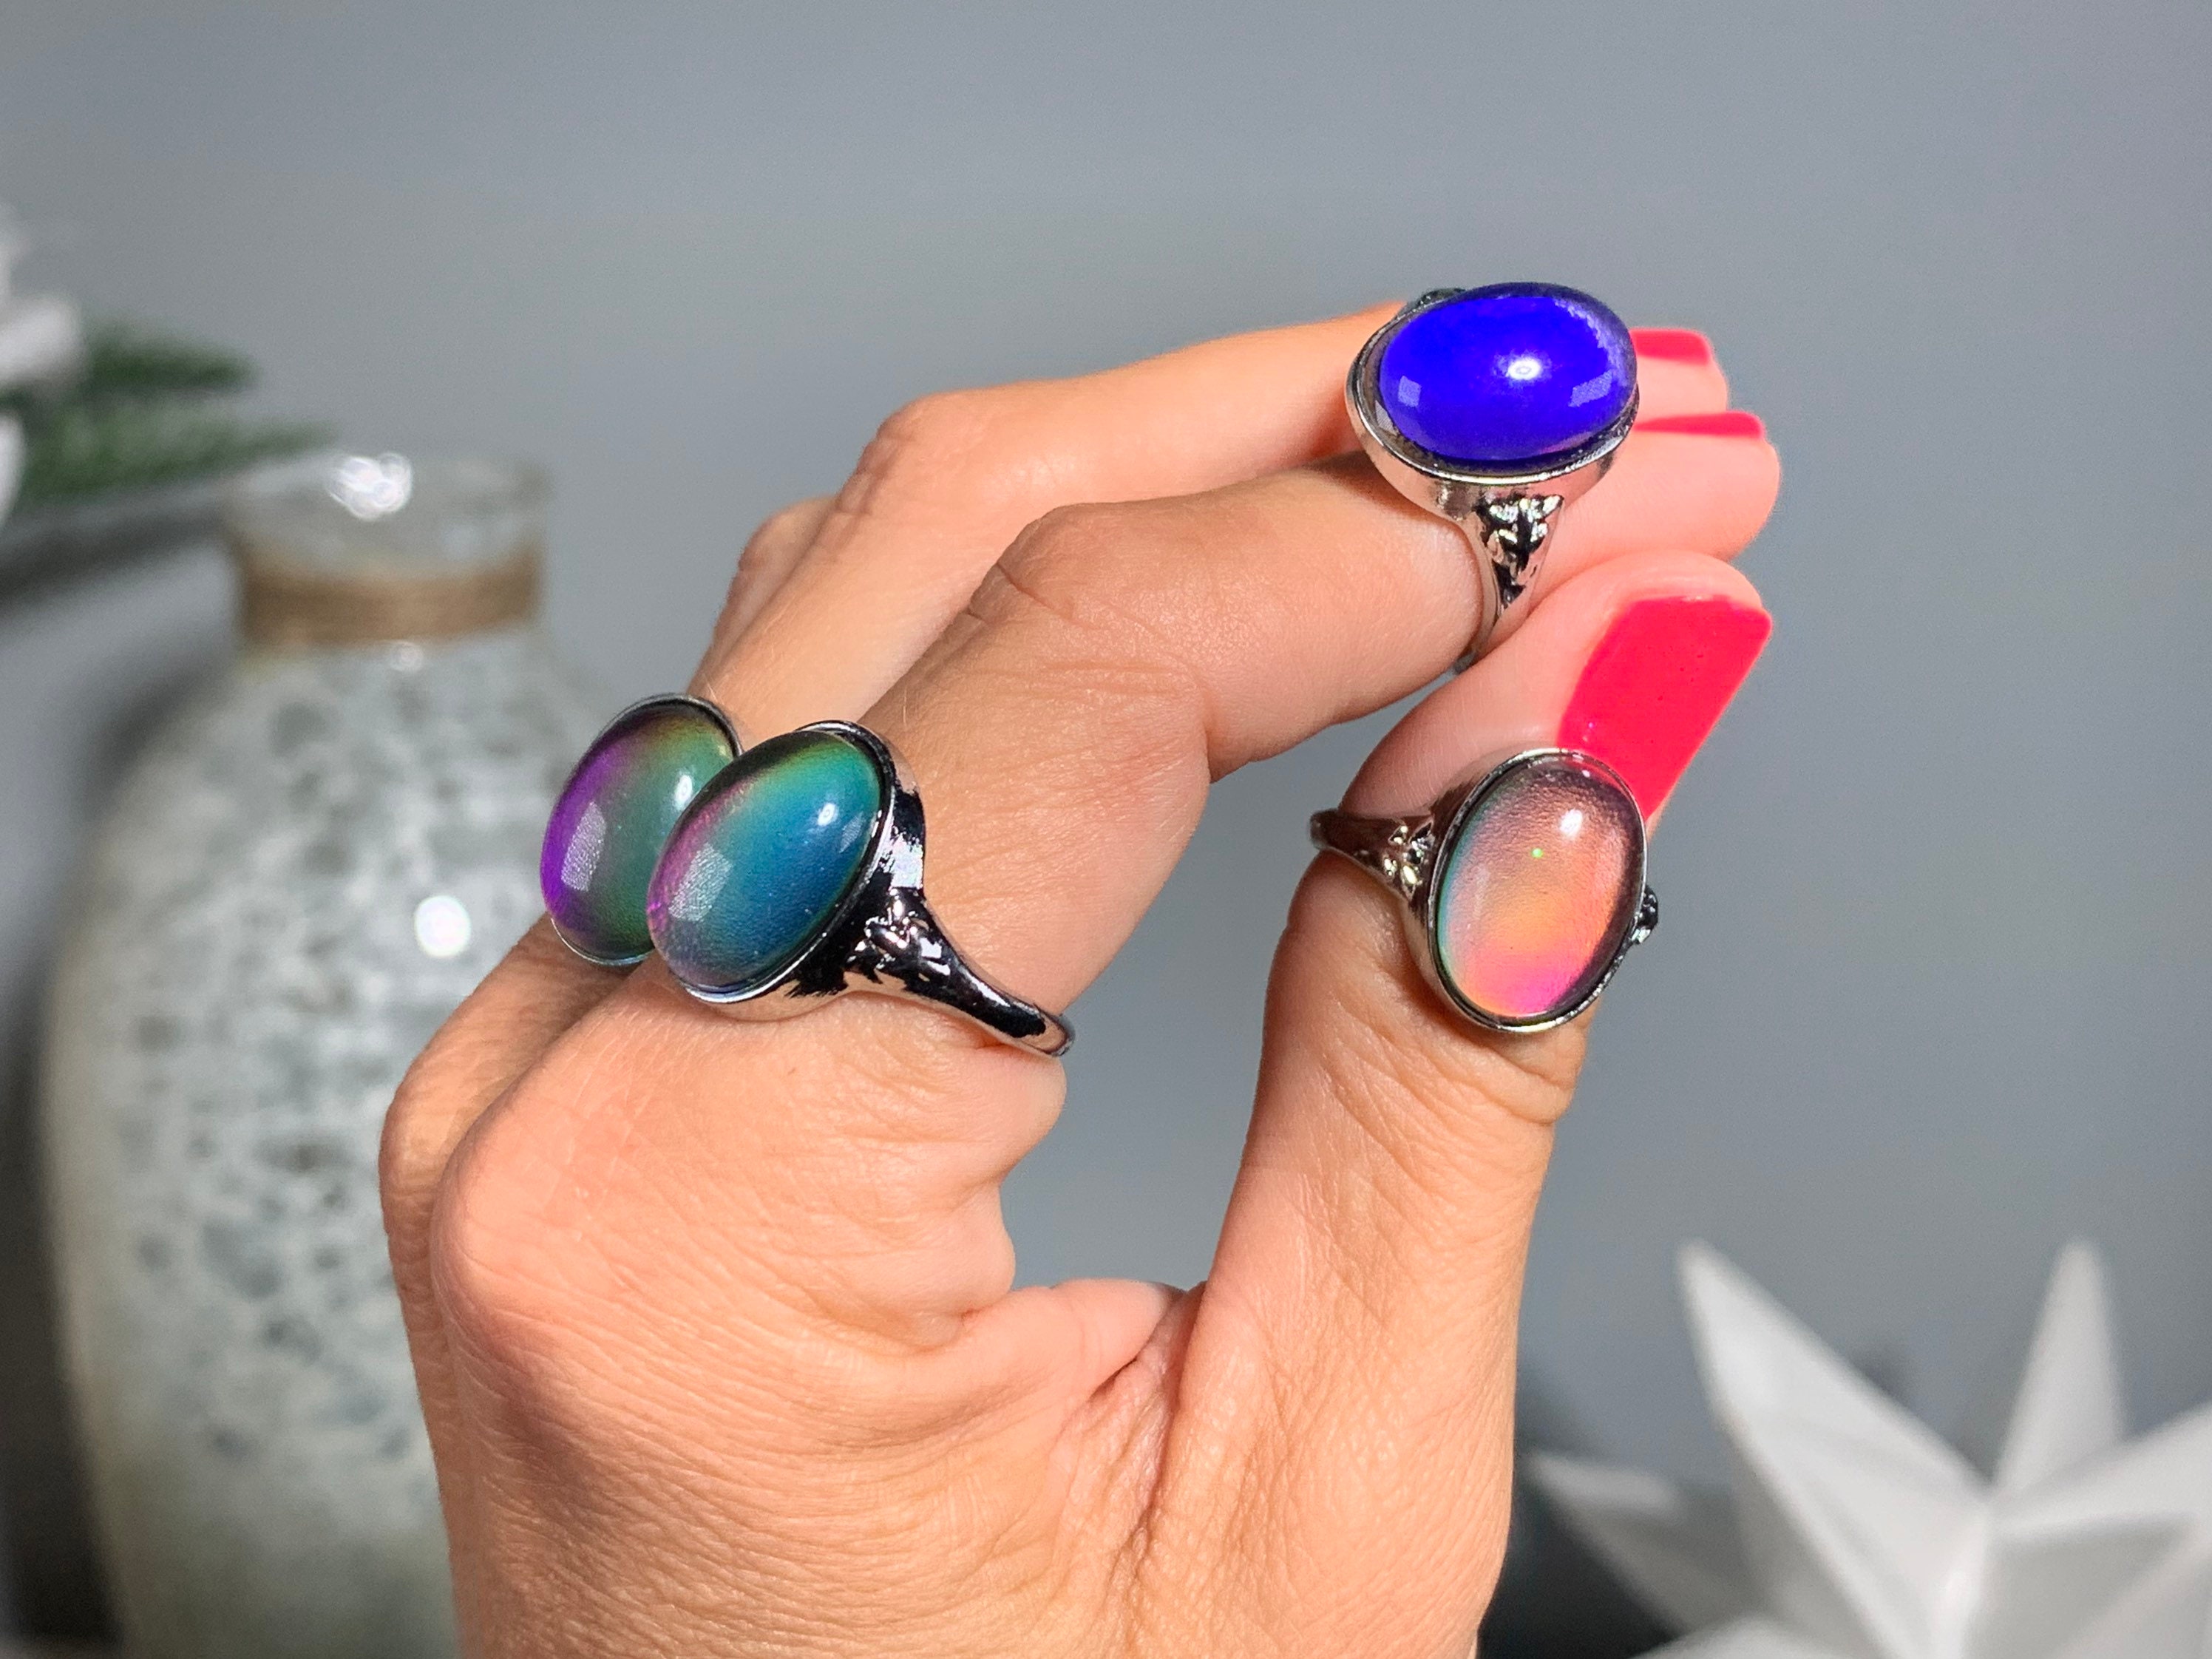 Buy Mood Ring, Color Changing Ring, Mood Jewelry Online in India - Etsy